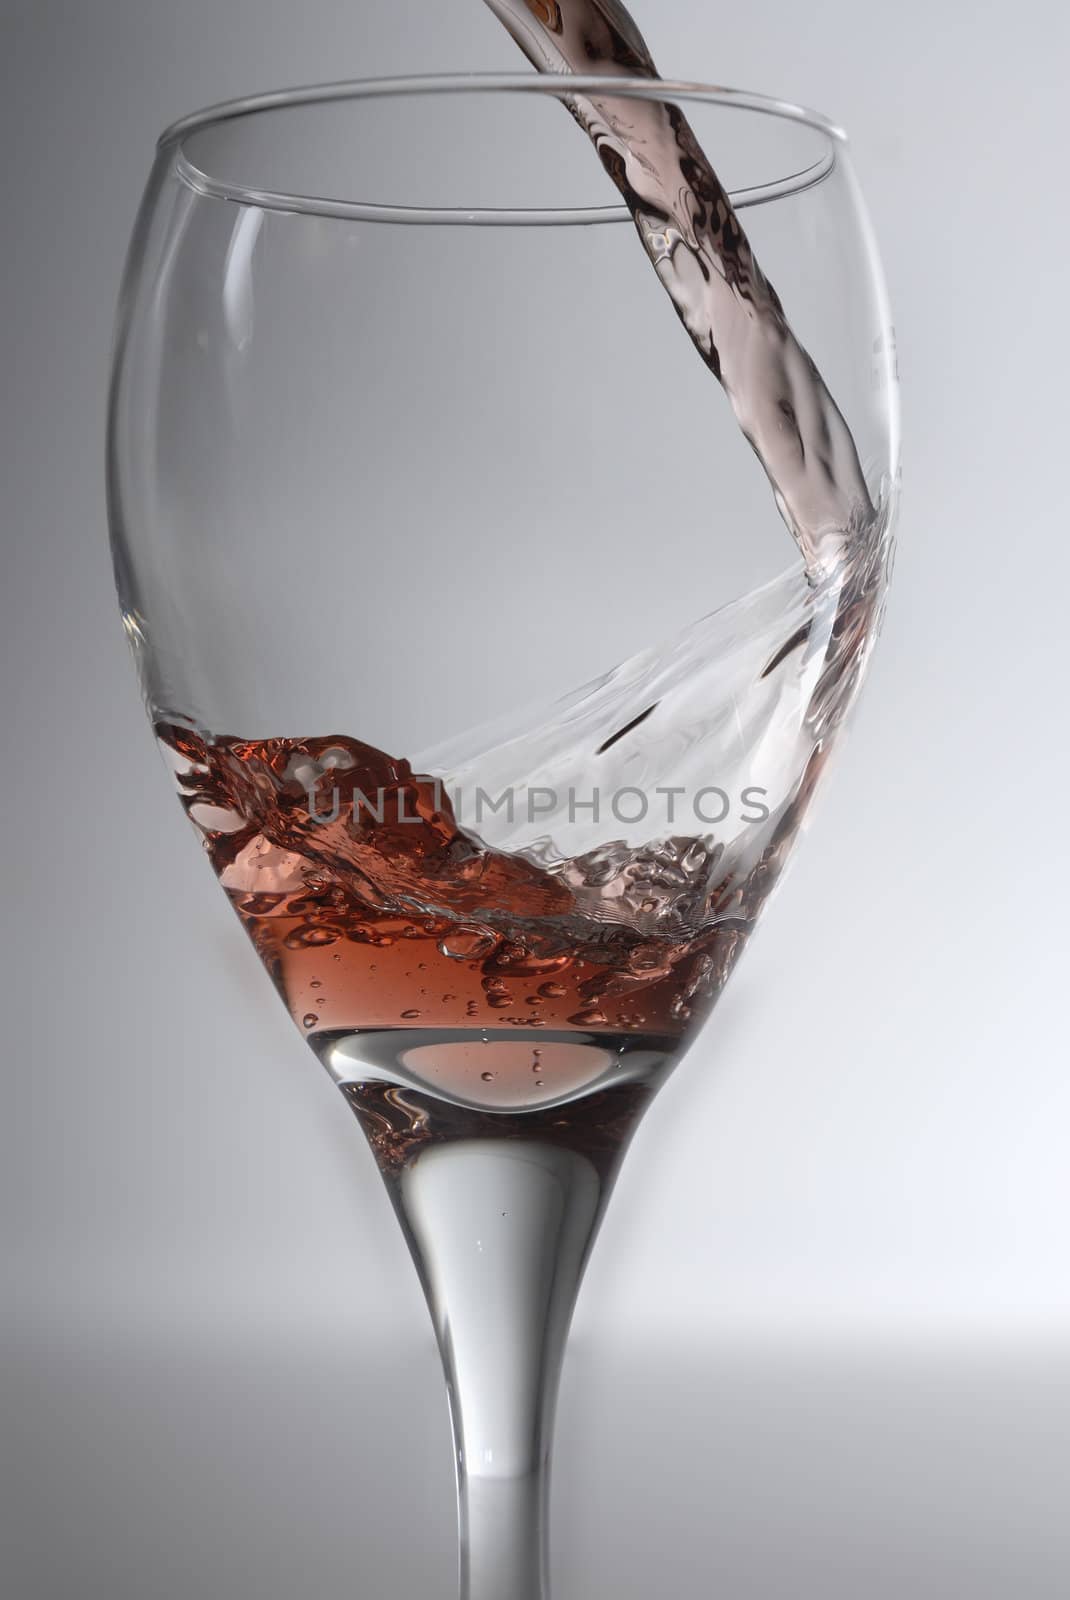 Rose wine being poured into a clean wine glass against a grey backround.